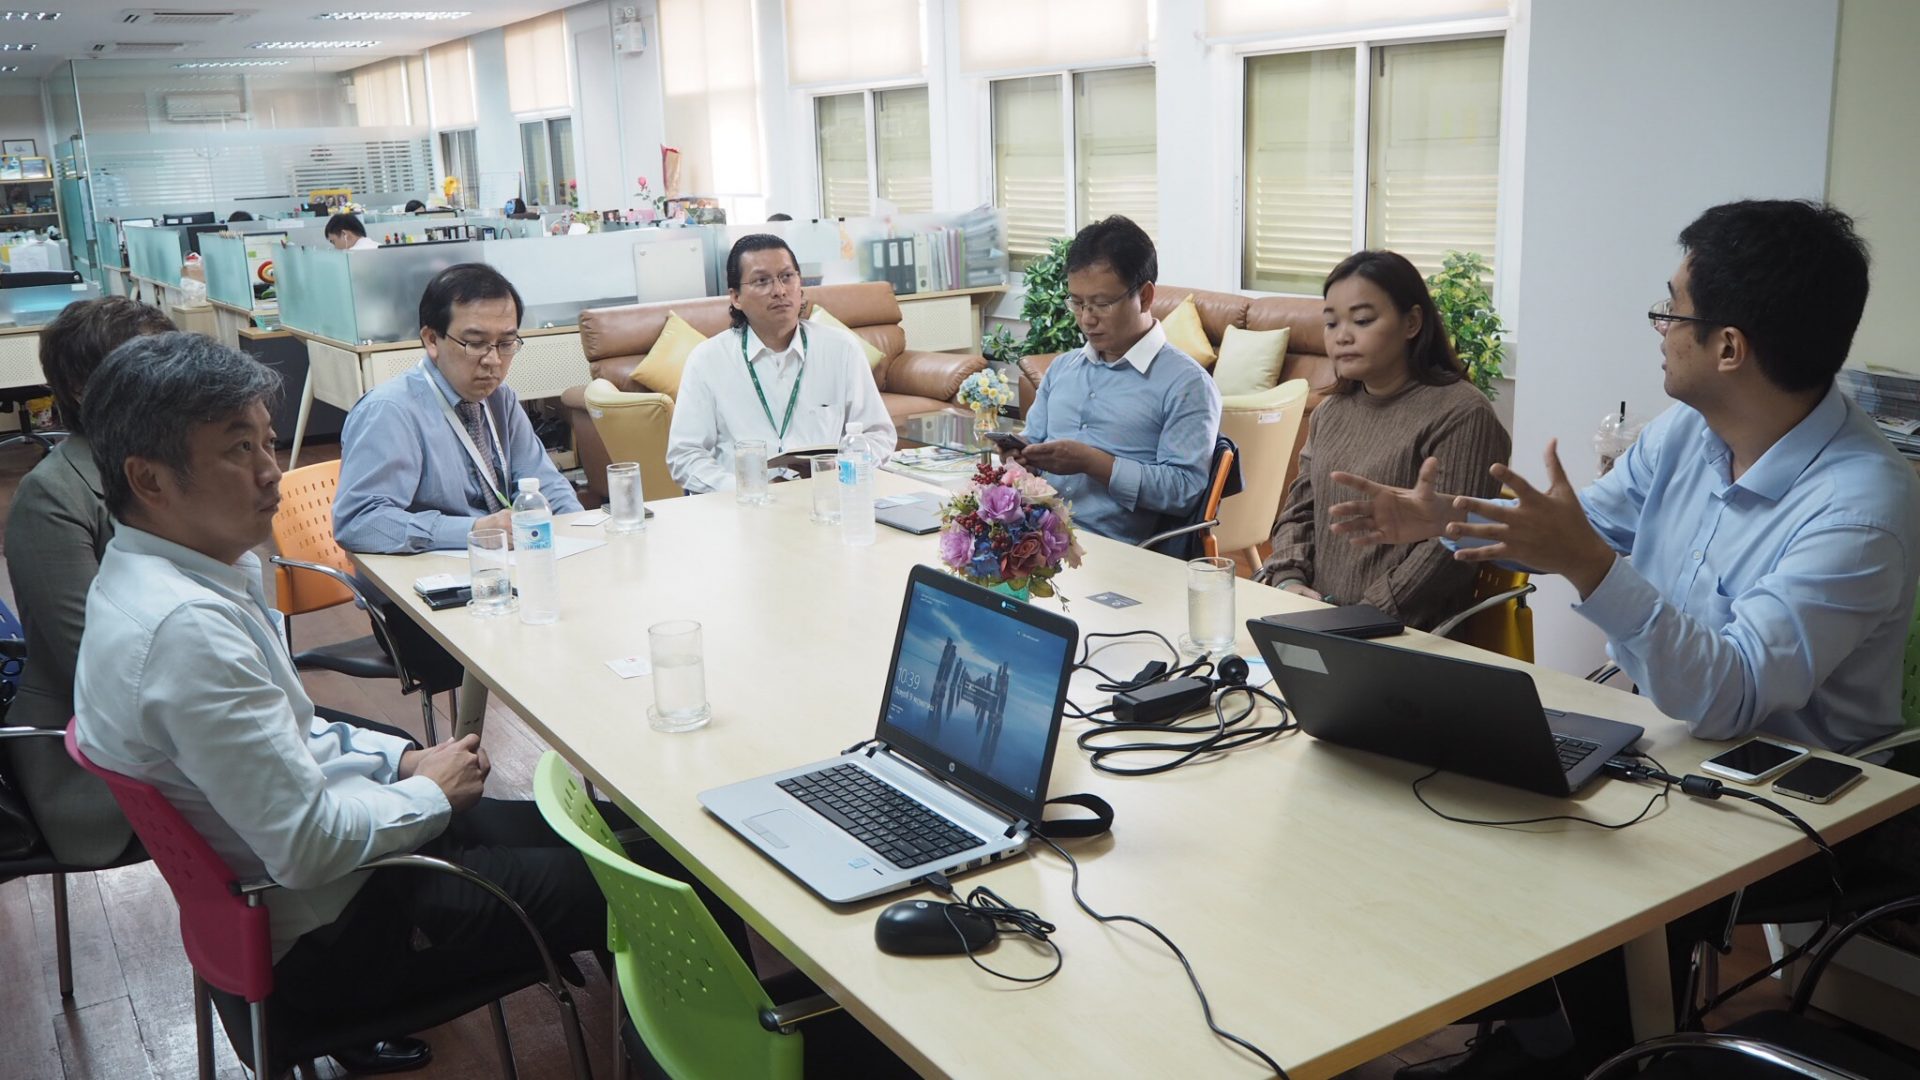 Discussion in Teleconference and Telemedicine Technology Between Siriraj and Huawei